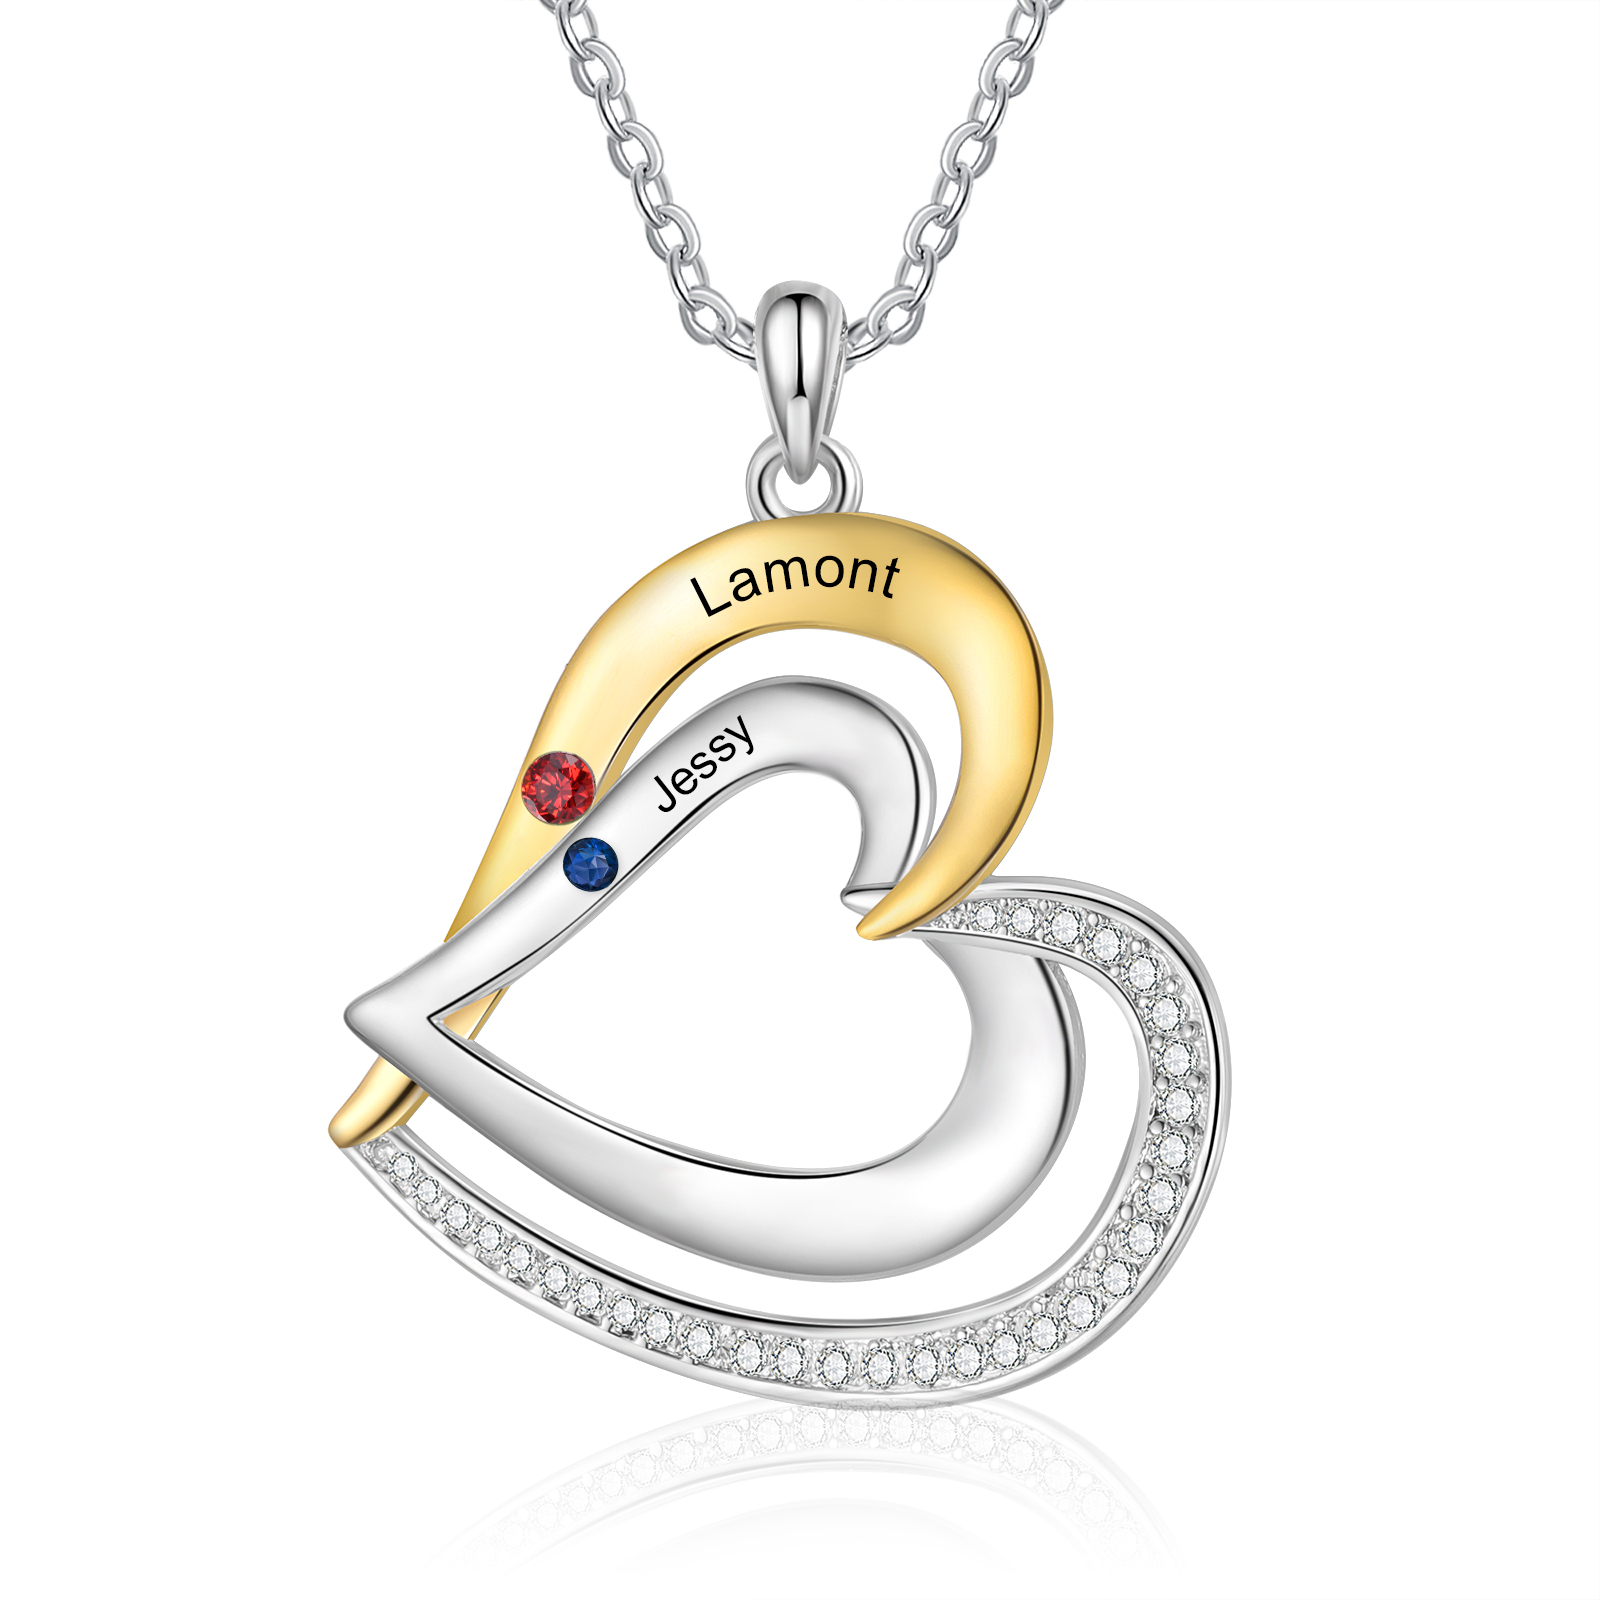 2 Names - Personalized Special Heart Necklace S925 Silver with Birthstone and Name Beautiful Gift for Her